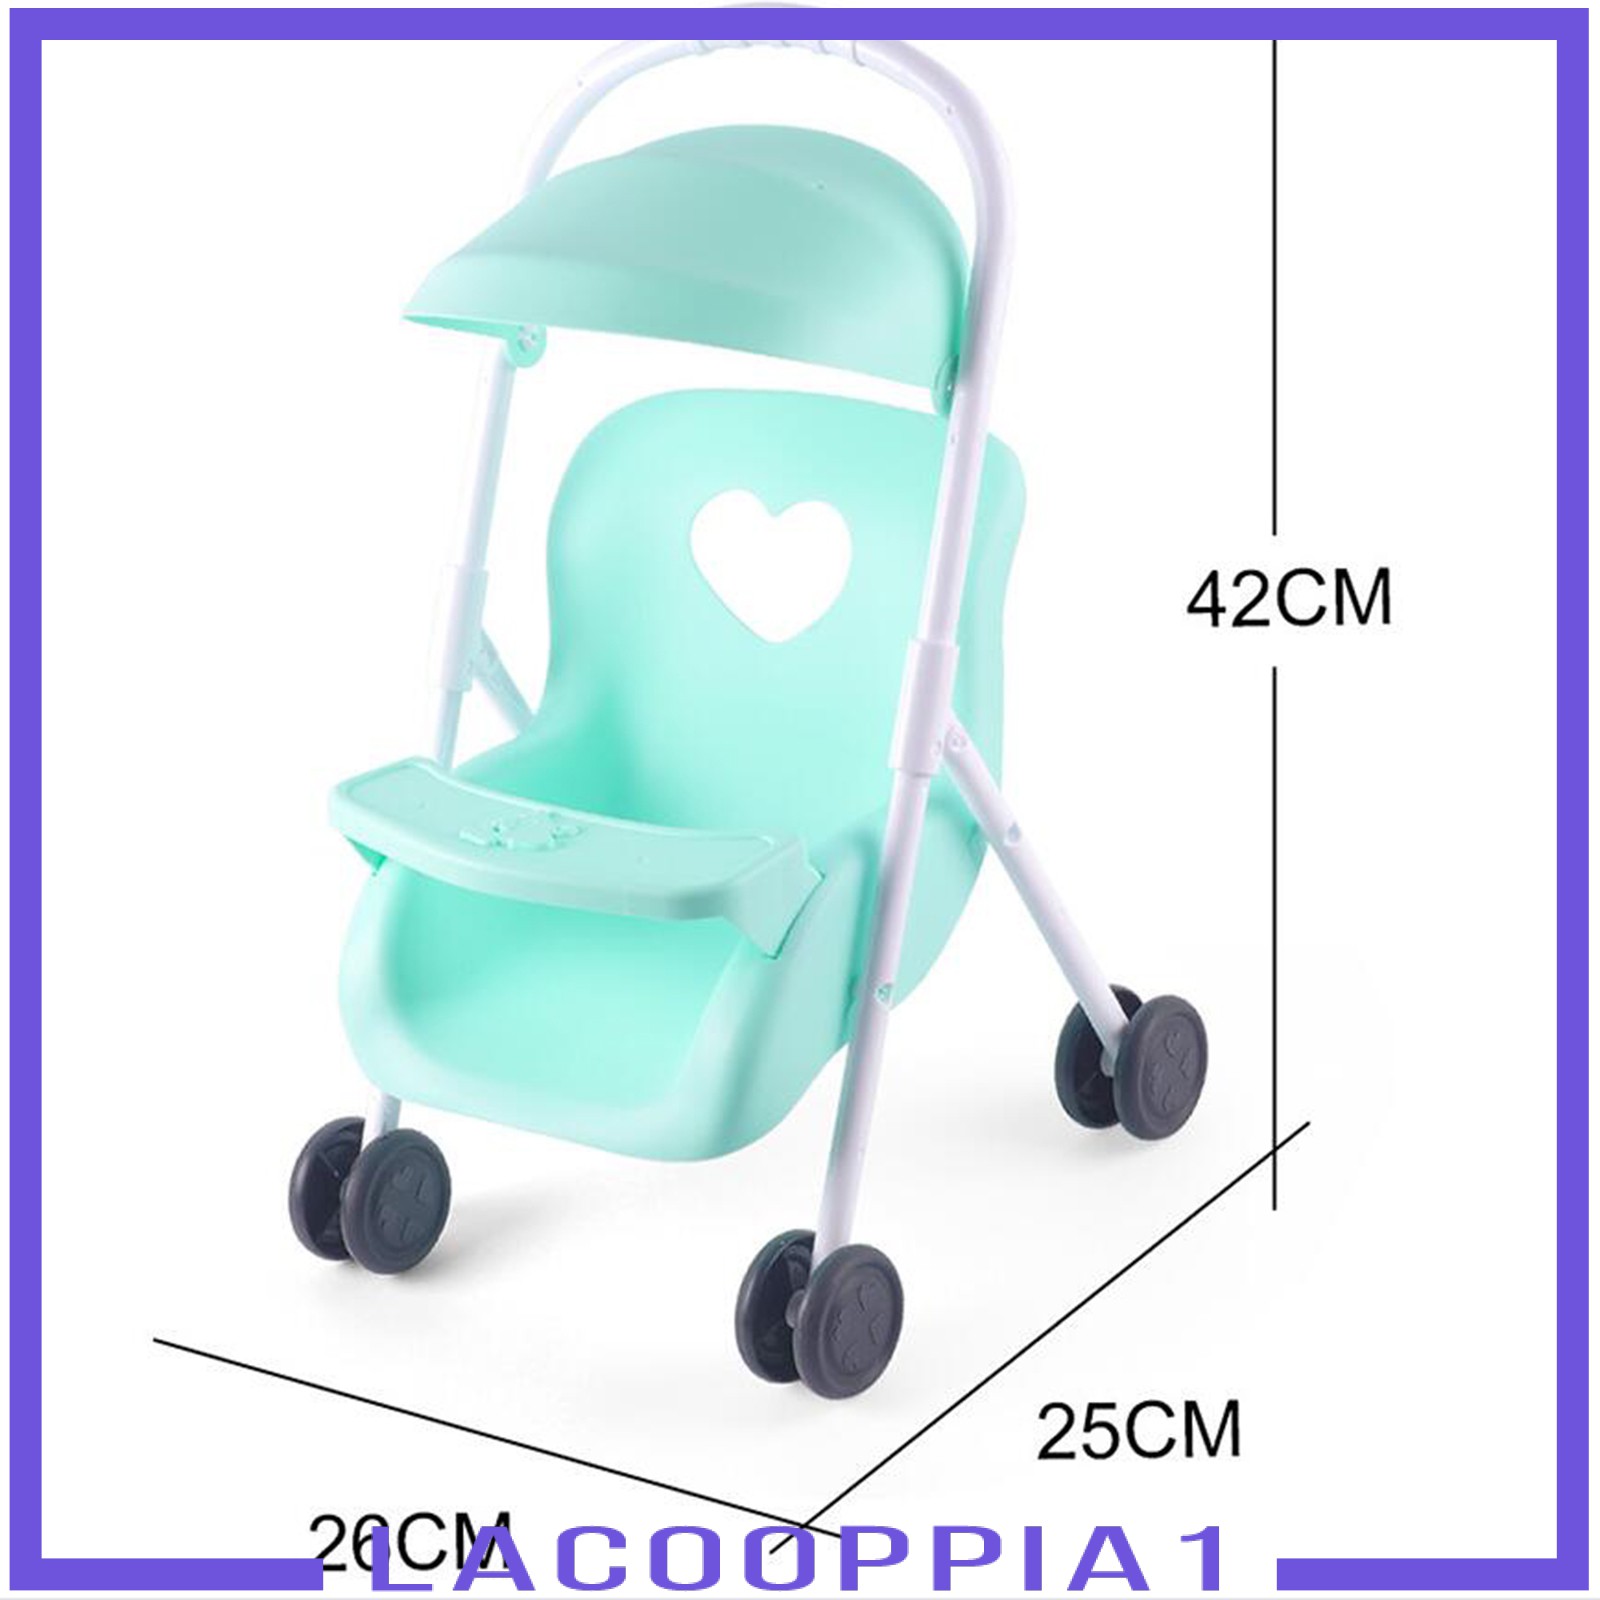 [LACOOPPIA1] Baby Doll Stroller Pushchairs Foldable Push Cart Toddlers Pretend Play Toy